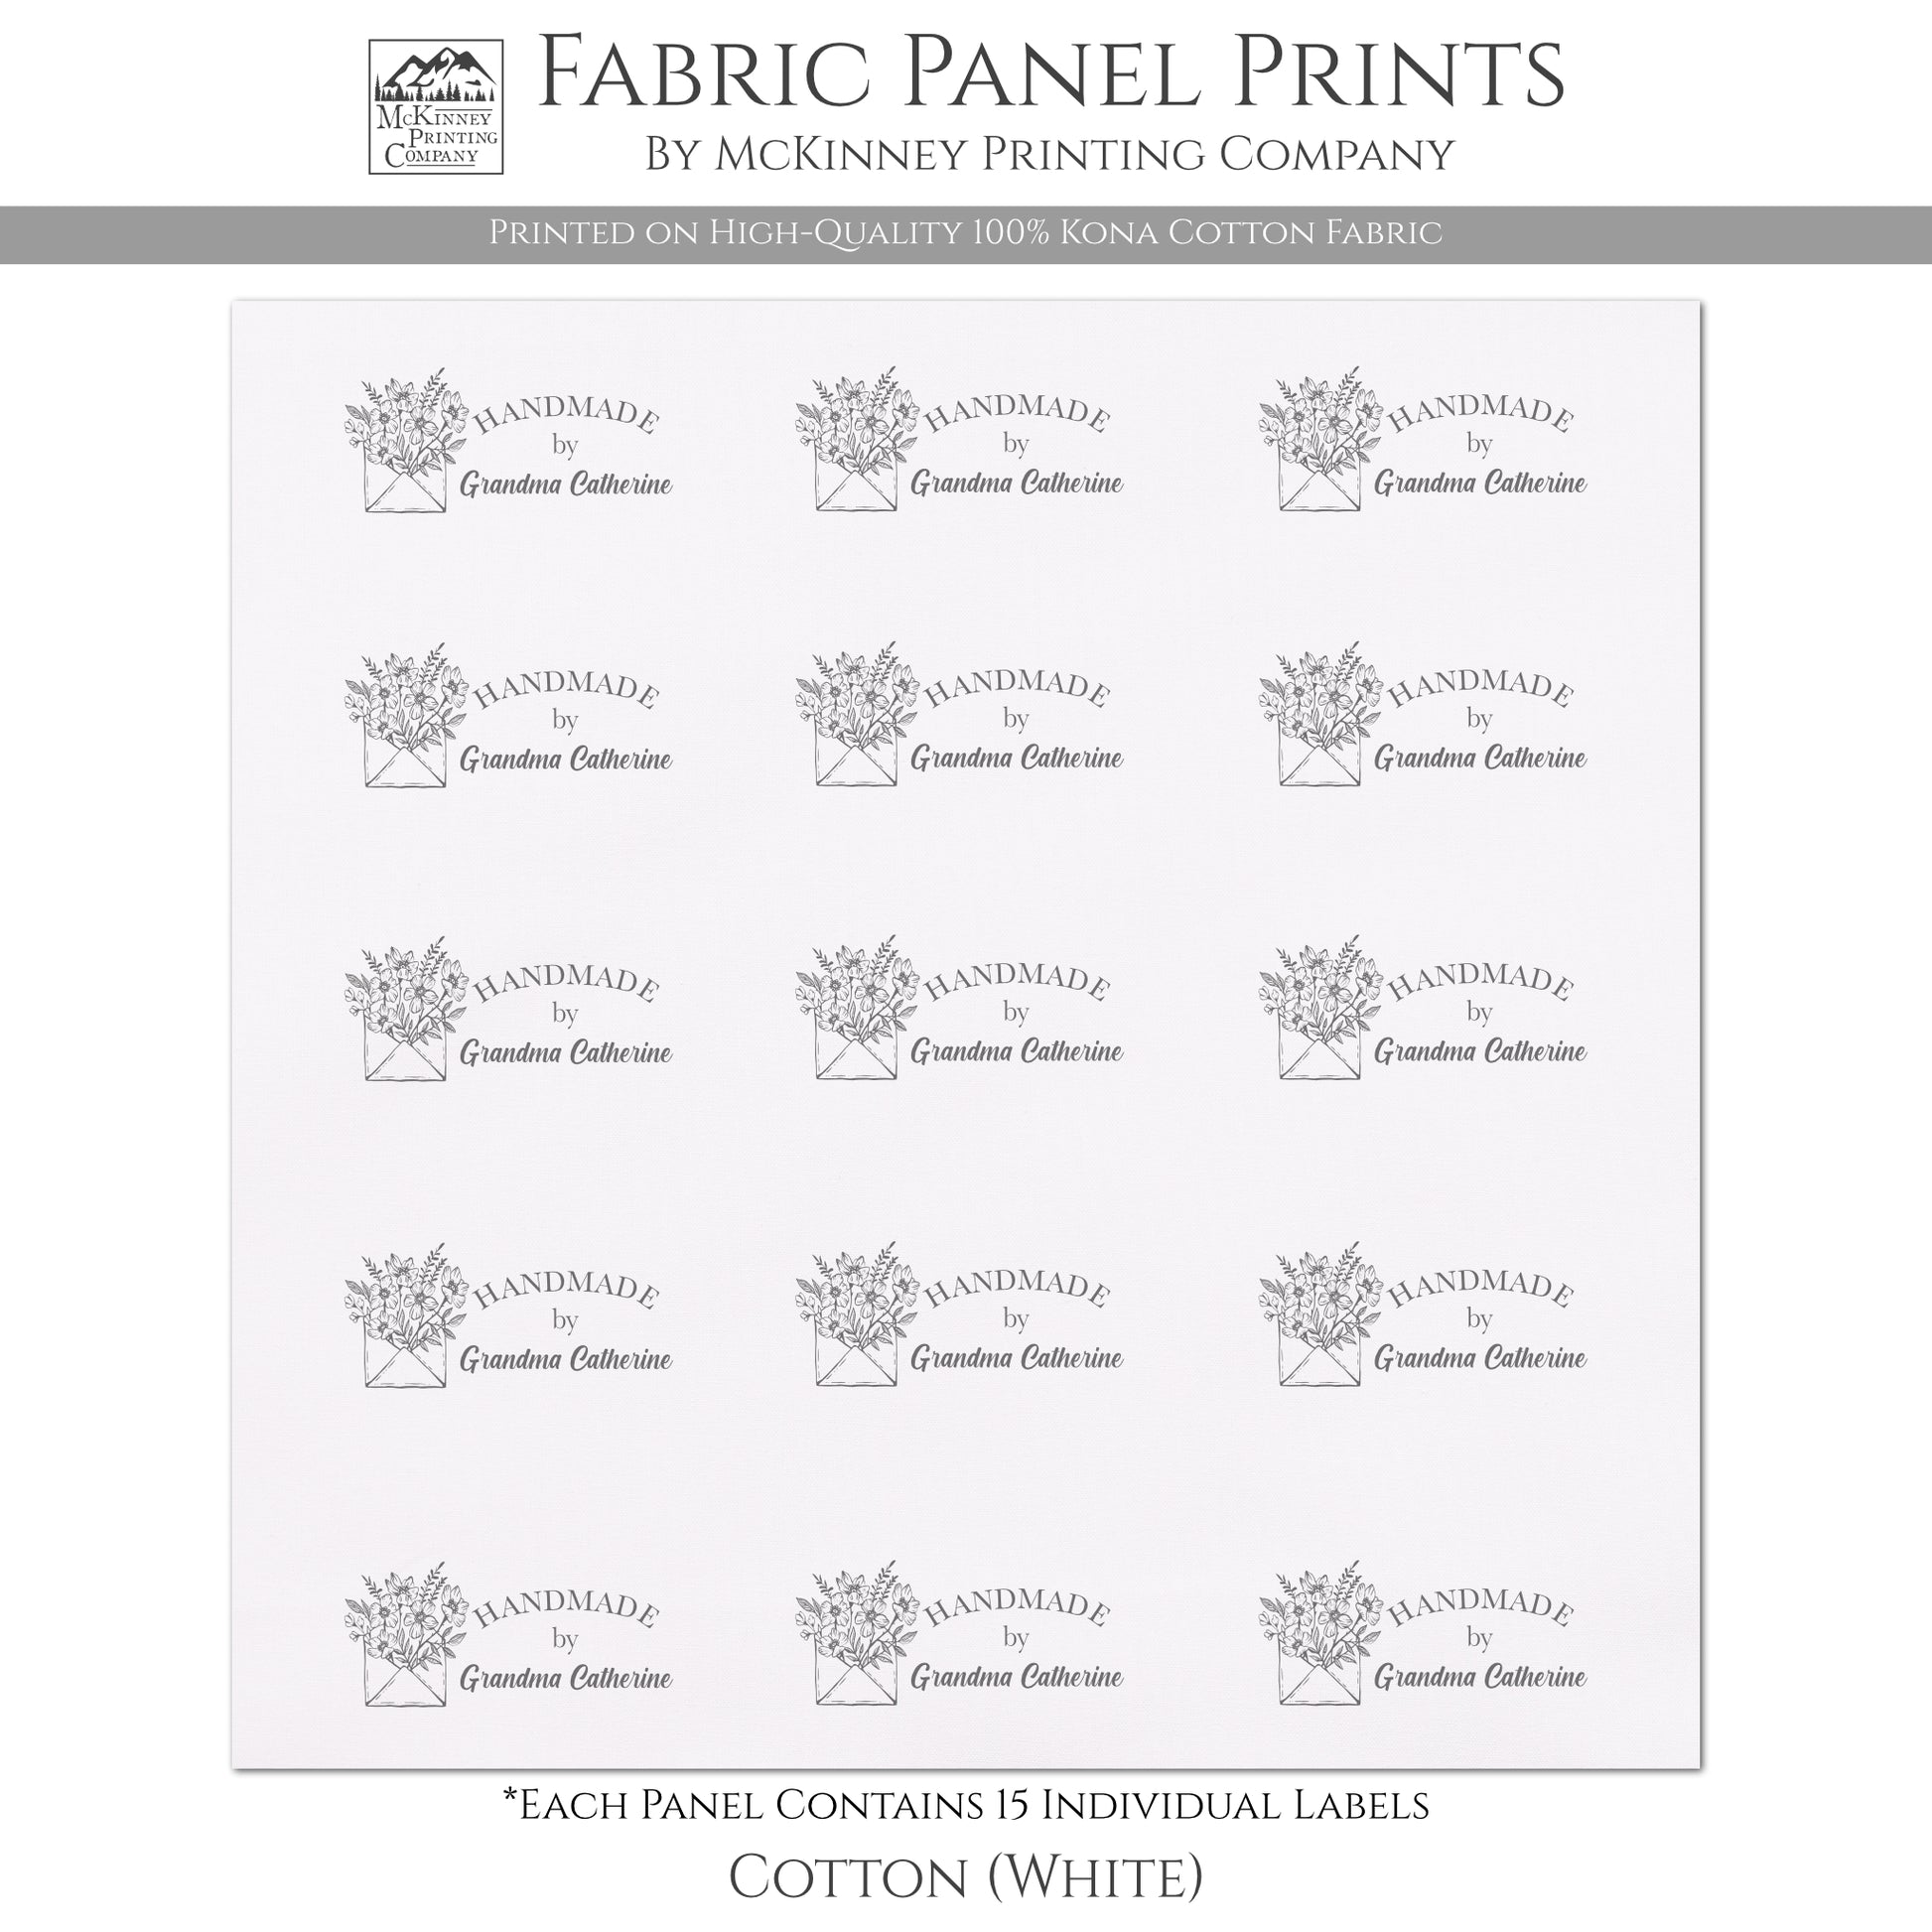 Quilt Labels - Fabric Panel Print for Handmade Sewing and Craft Projects, Supplies and Materials - Kona Cotton, White